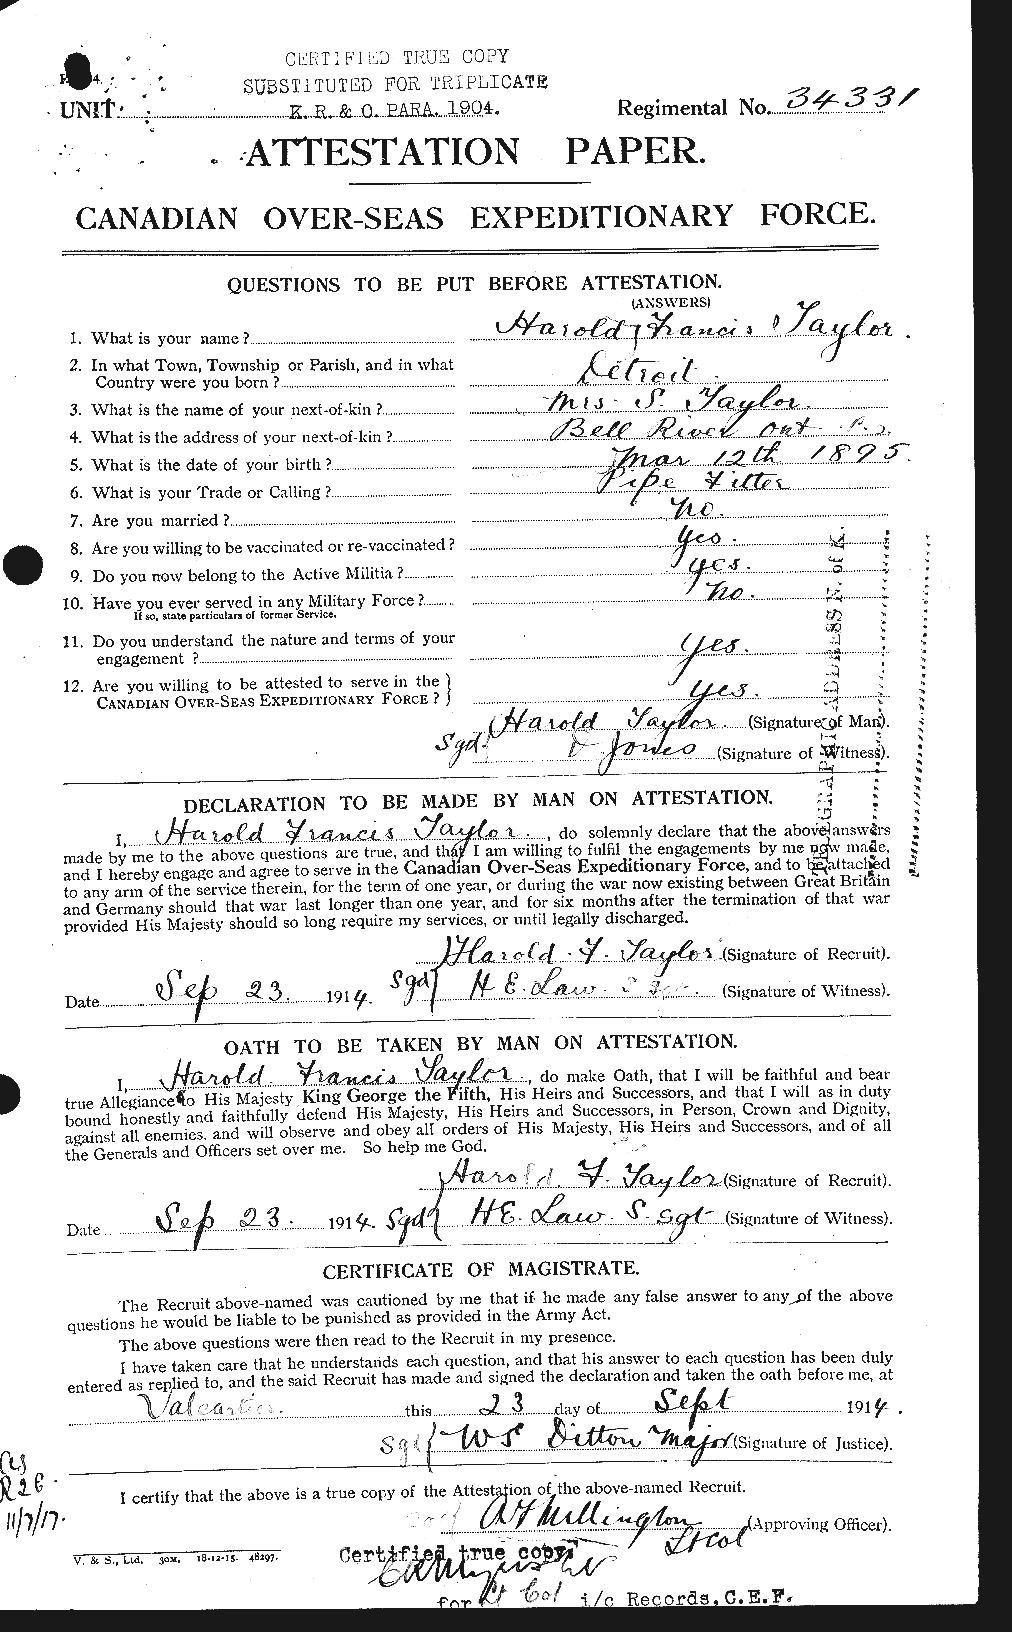 Personnel Records of the First World War - CEF 626421a